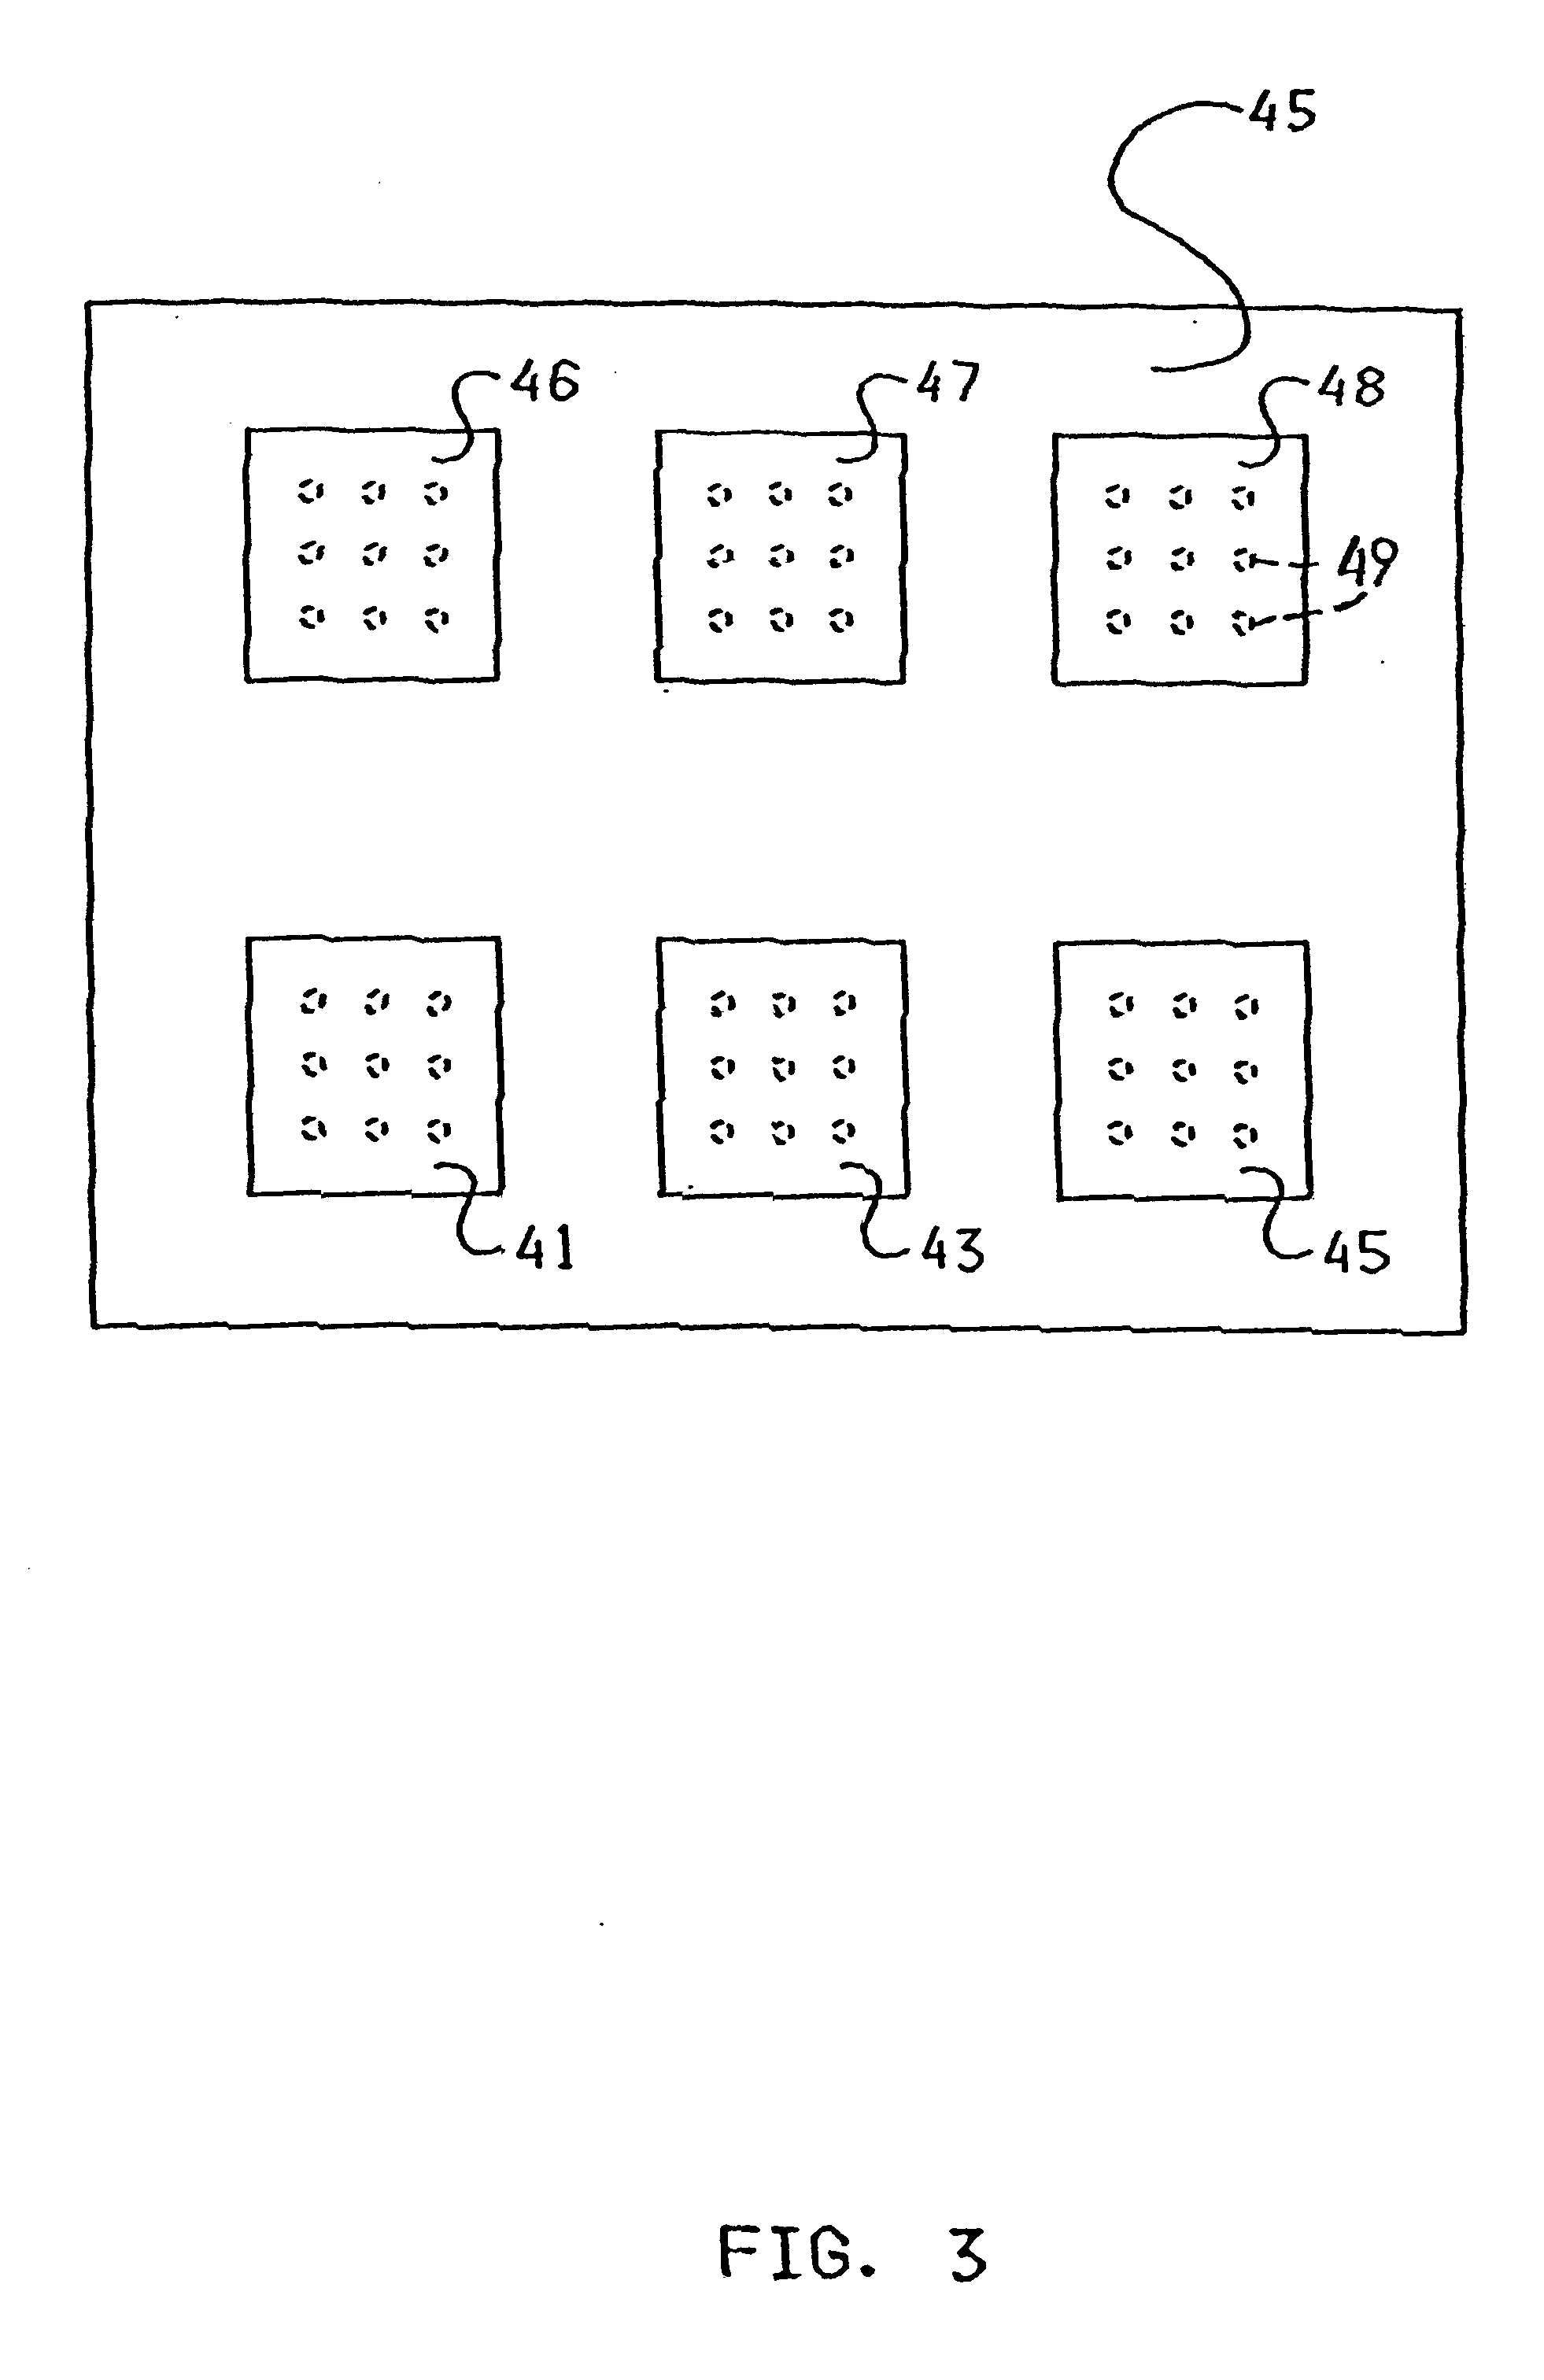 Apparatus and method for non-destructive, low stress removal of soldered electronic components